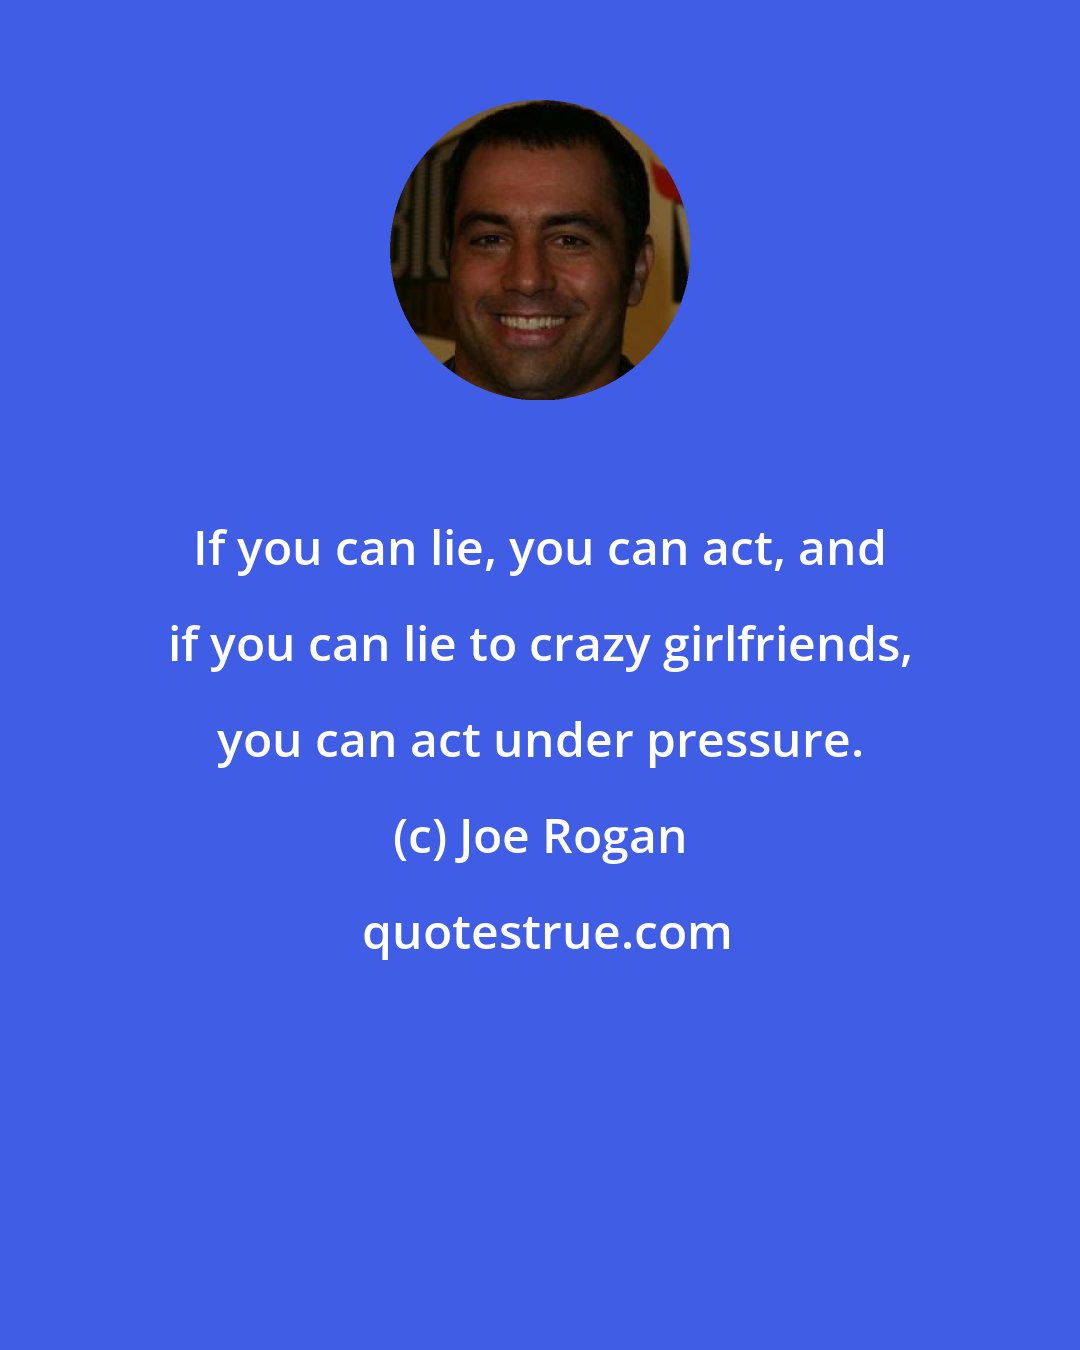 Joe Rogan: If you can lie, you can act, and if you can lie to crazy girlfriends, you can act under pressure.